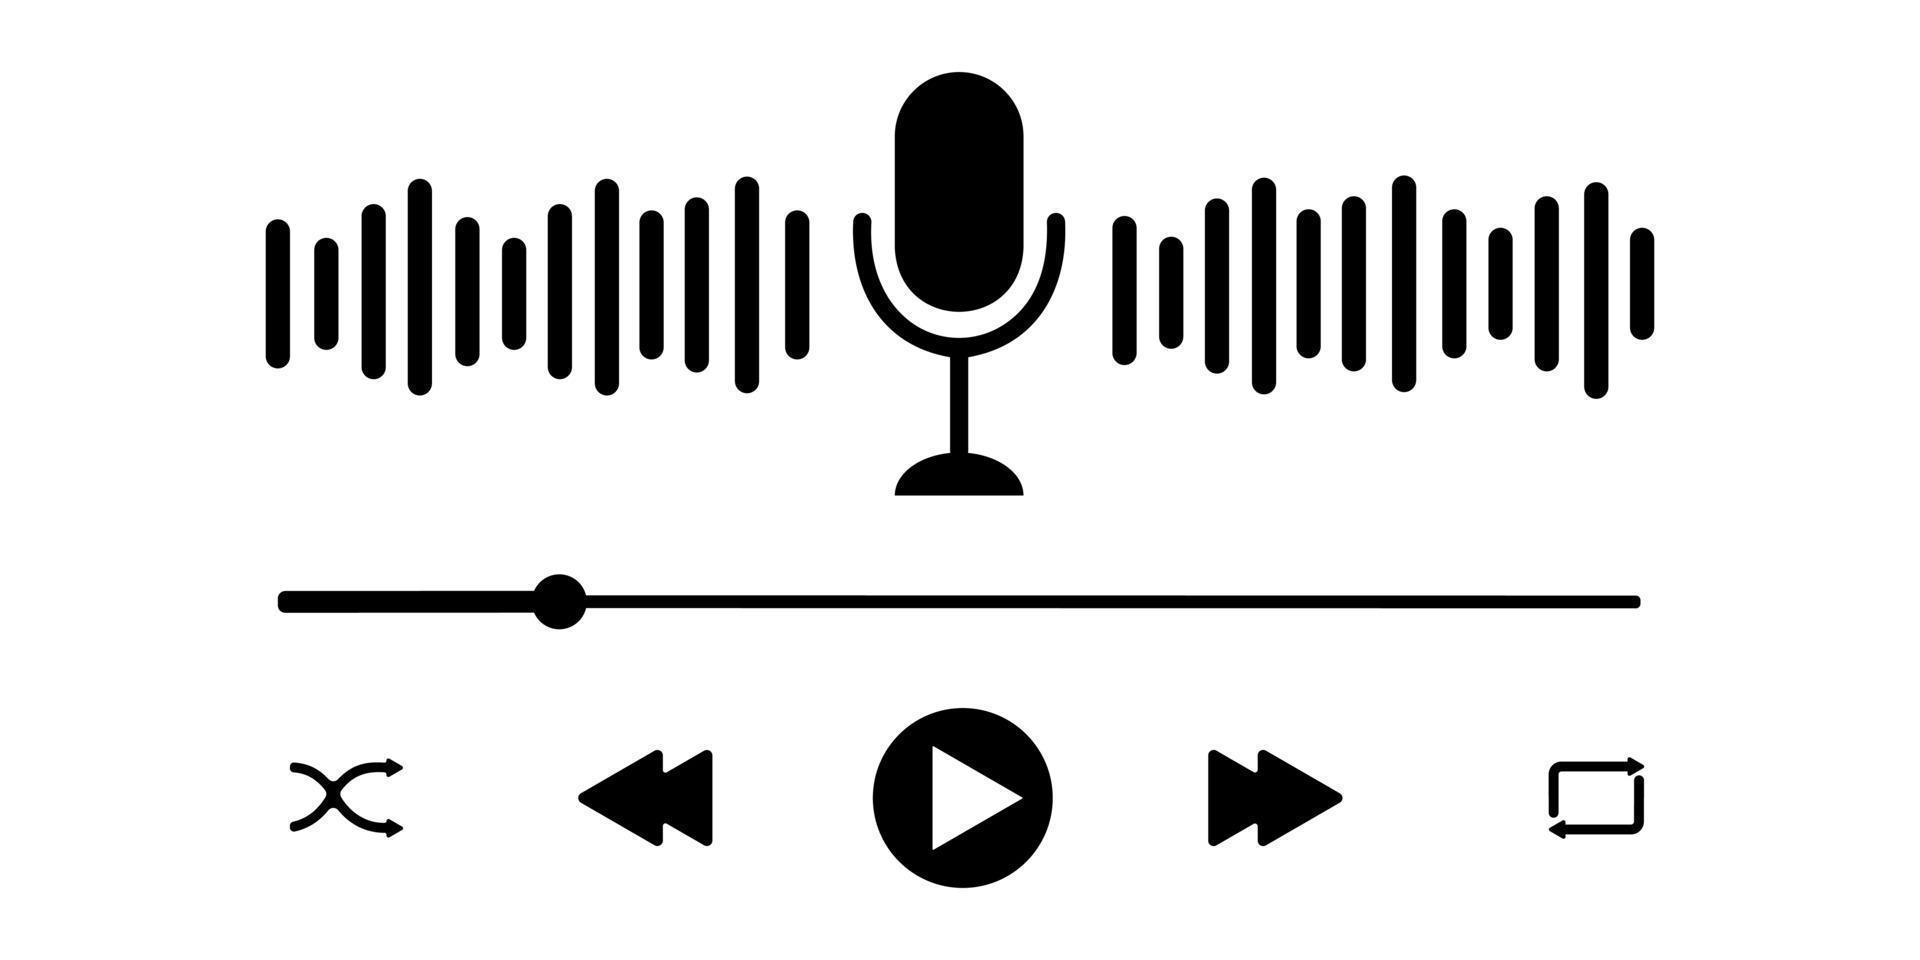 Podcast player interface with microphone, sound wave, loading progress bar and buttons. Simple audio player panel template for mobile app vector